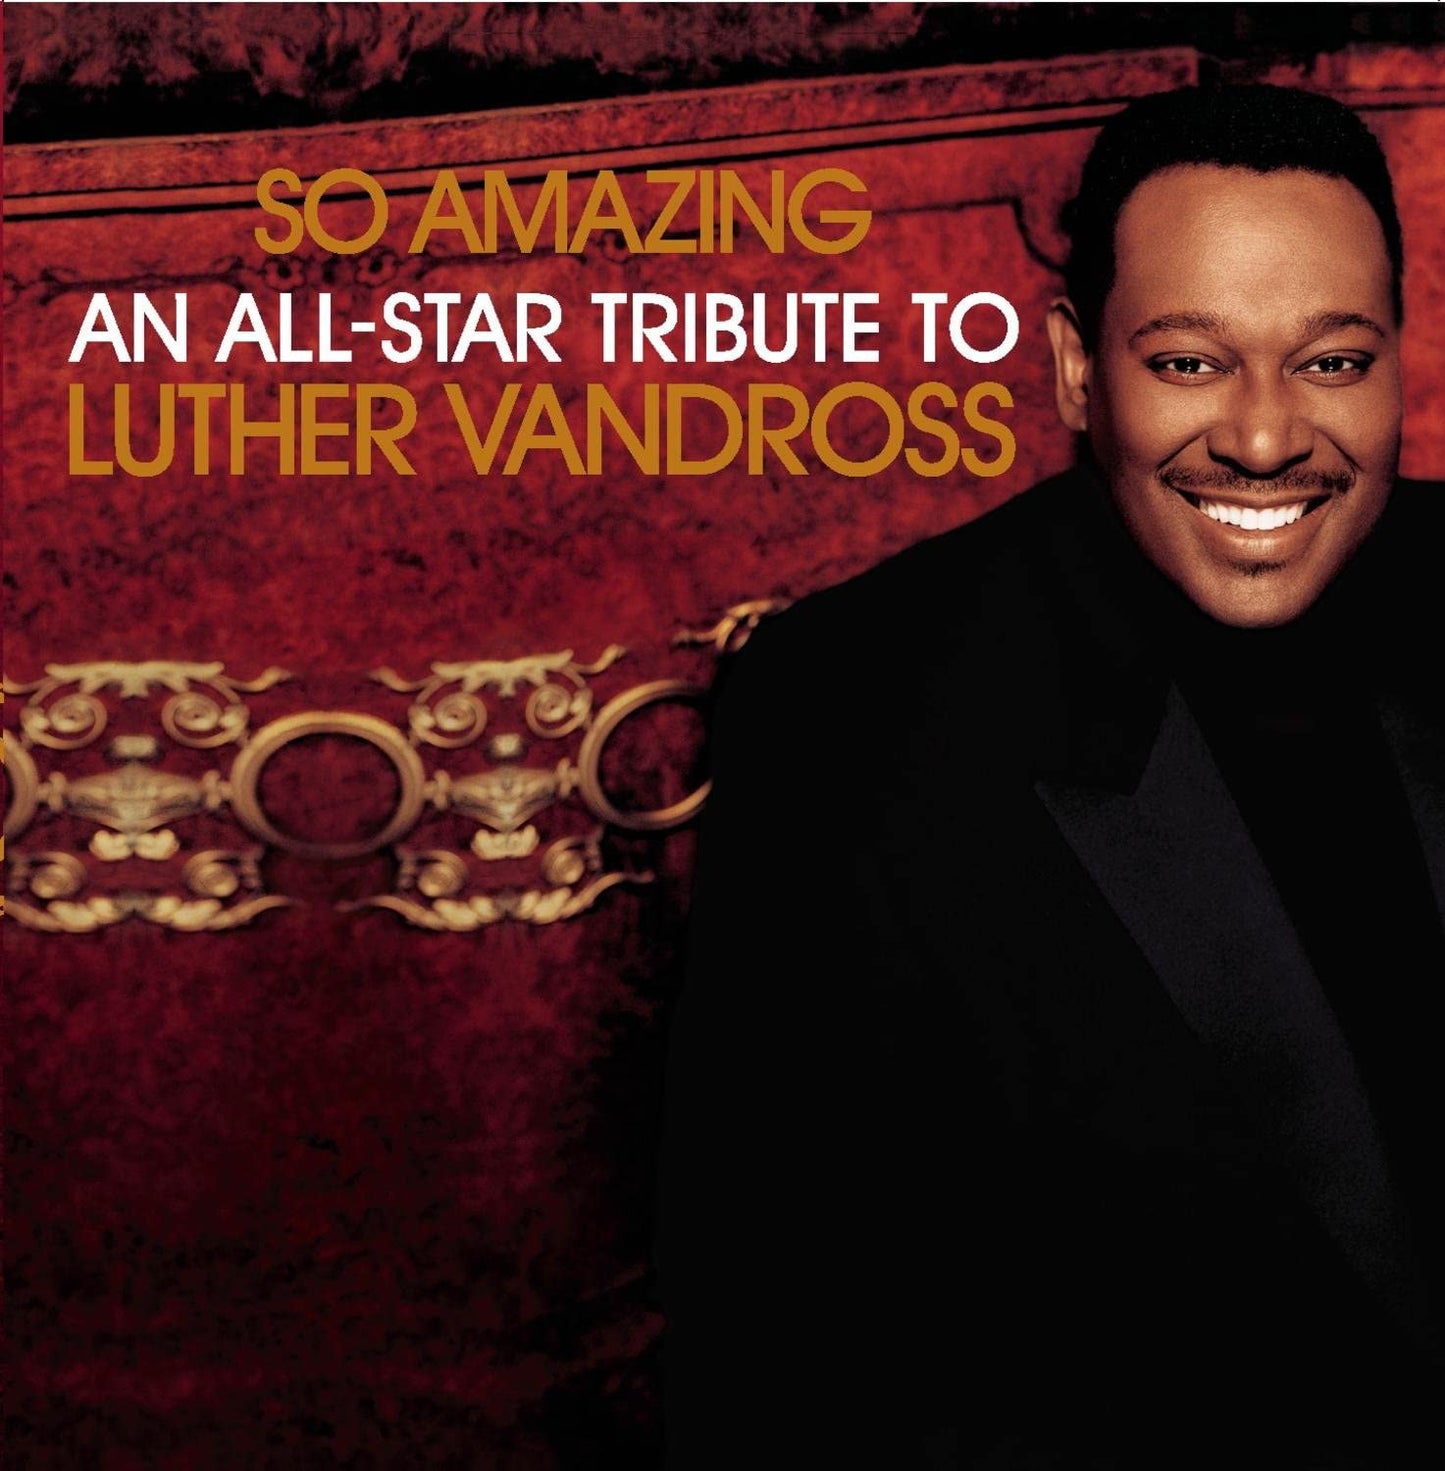 So Amazing: An All Star Tribute to Luther Vandross [Audio CD] Various Artists